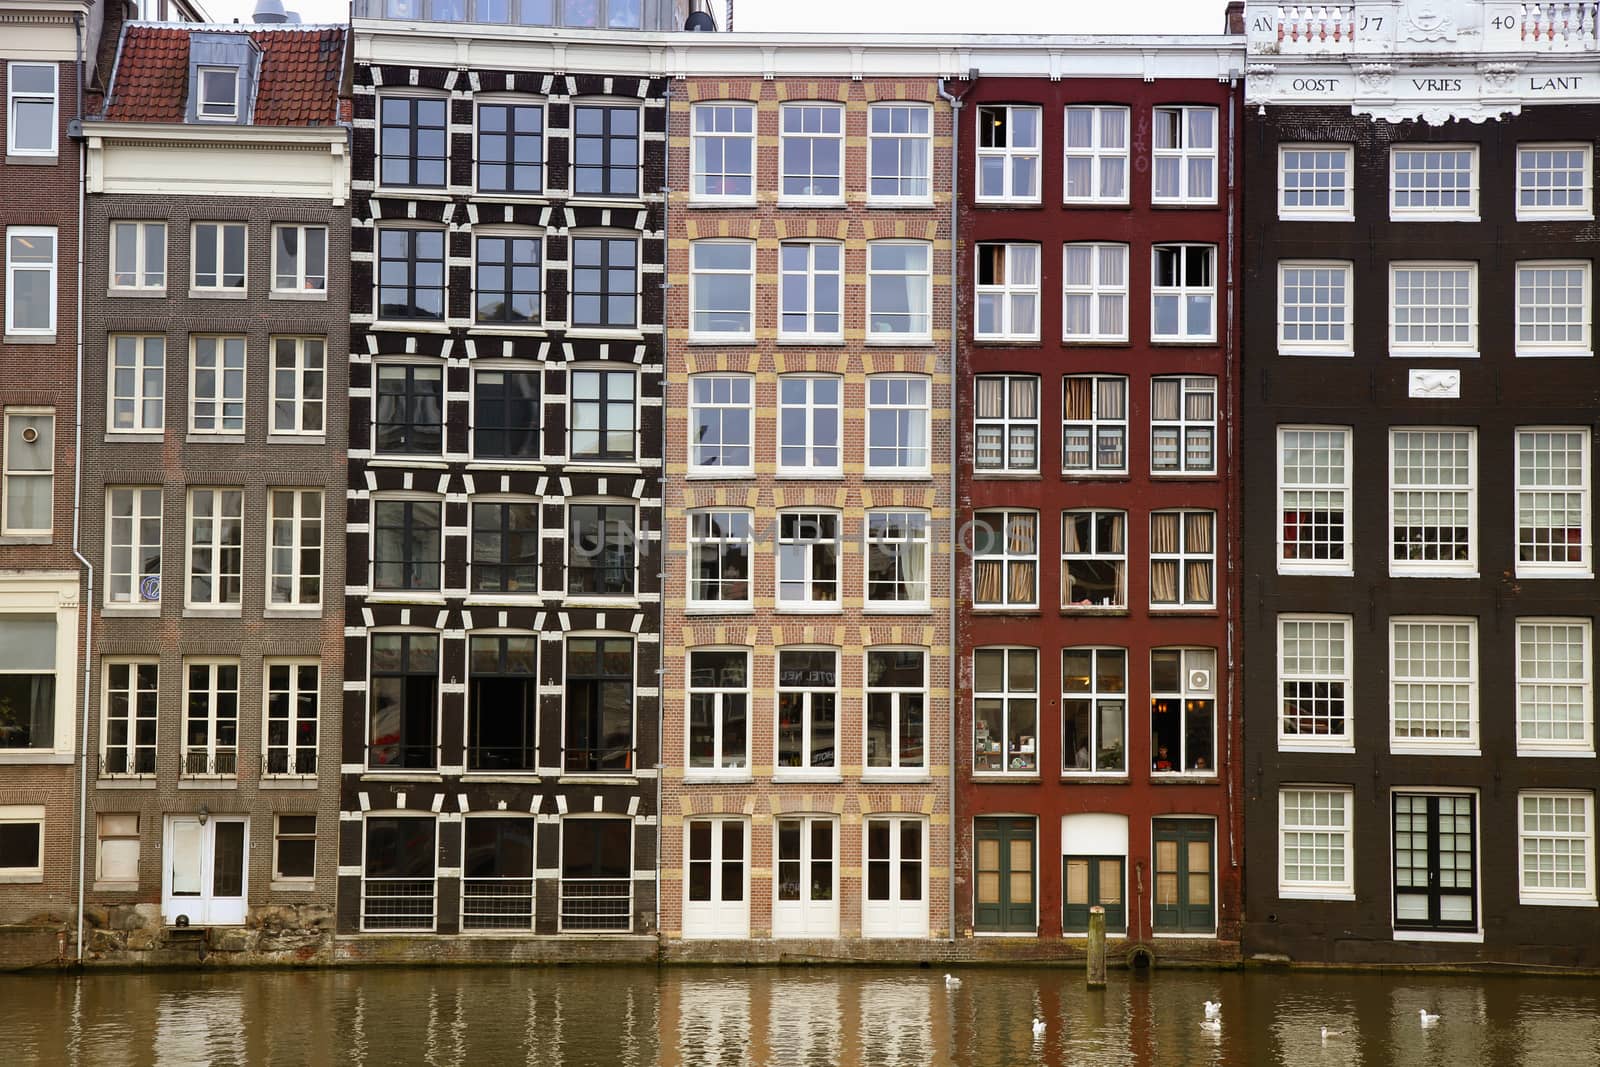 AMSTERDAM; THE NETHERLANDS - AUGUST 16; 2015: Beautiful views of the ancient buildings at the waterside, Damrak canal in Amsterdam. Amsterdam is capital of the Netherlands on August 16; 2015.